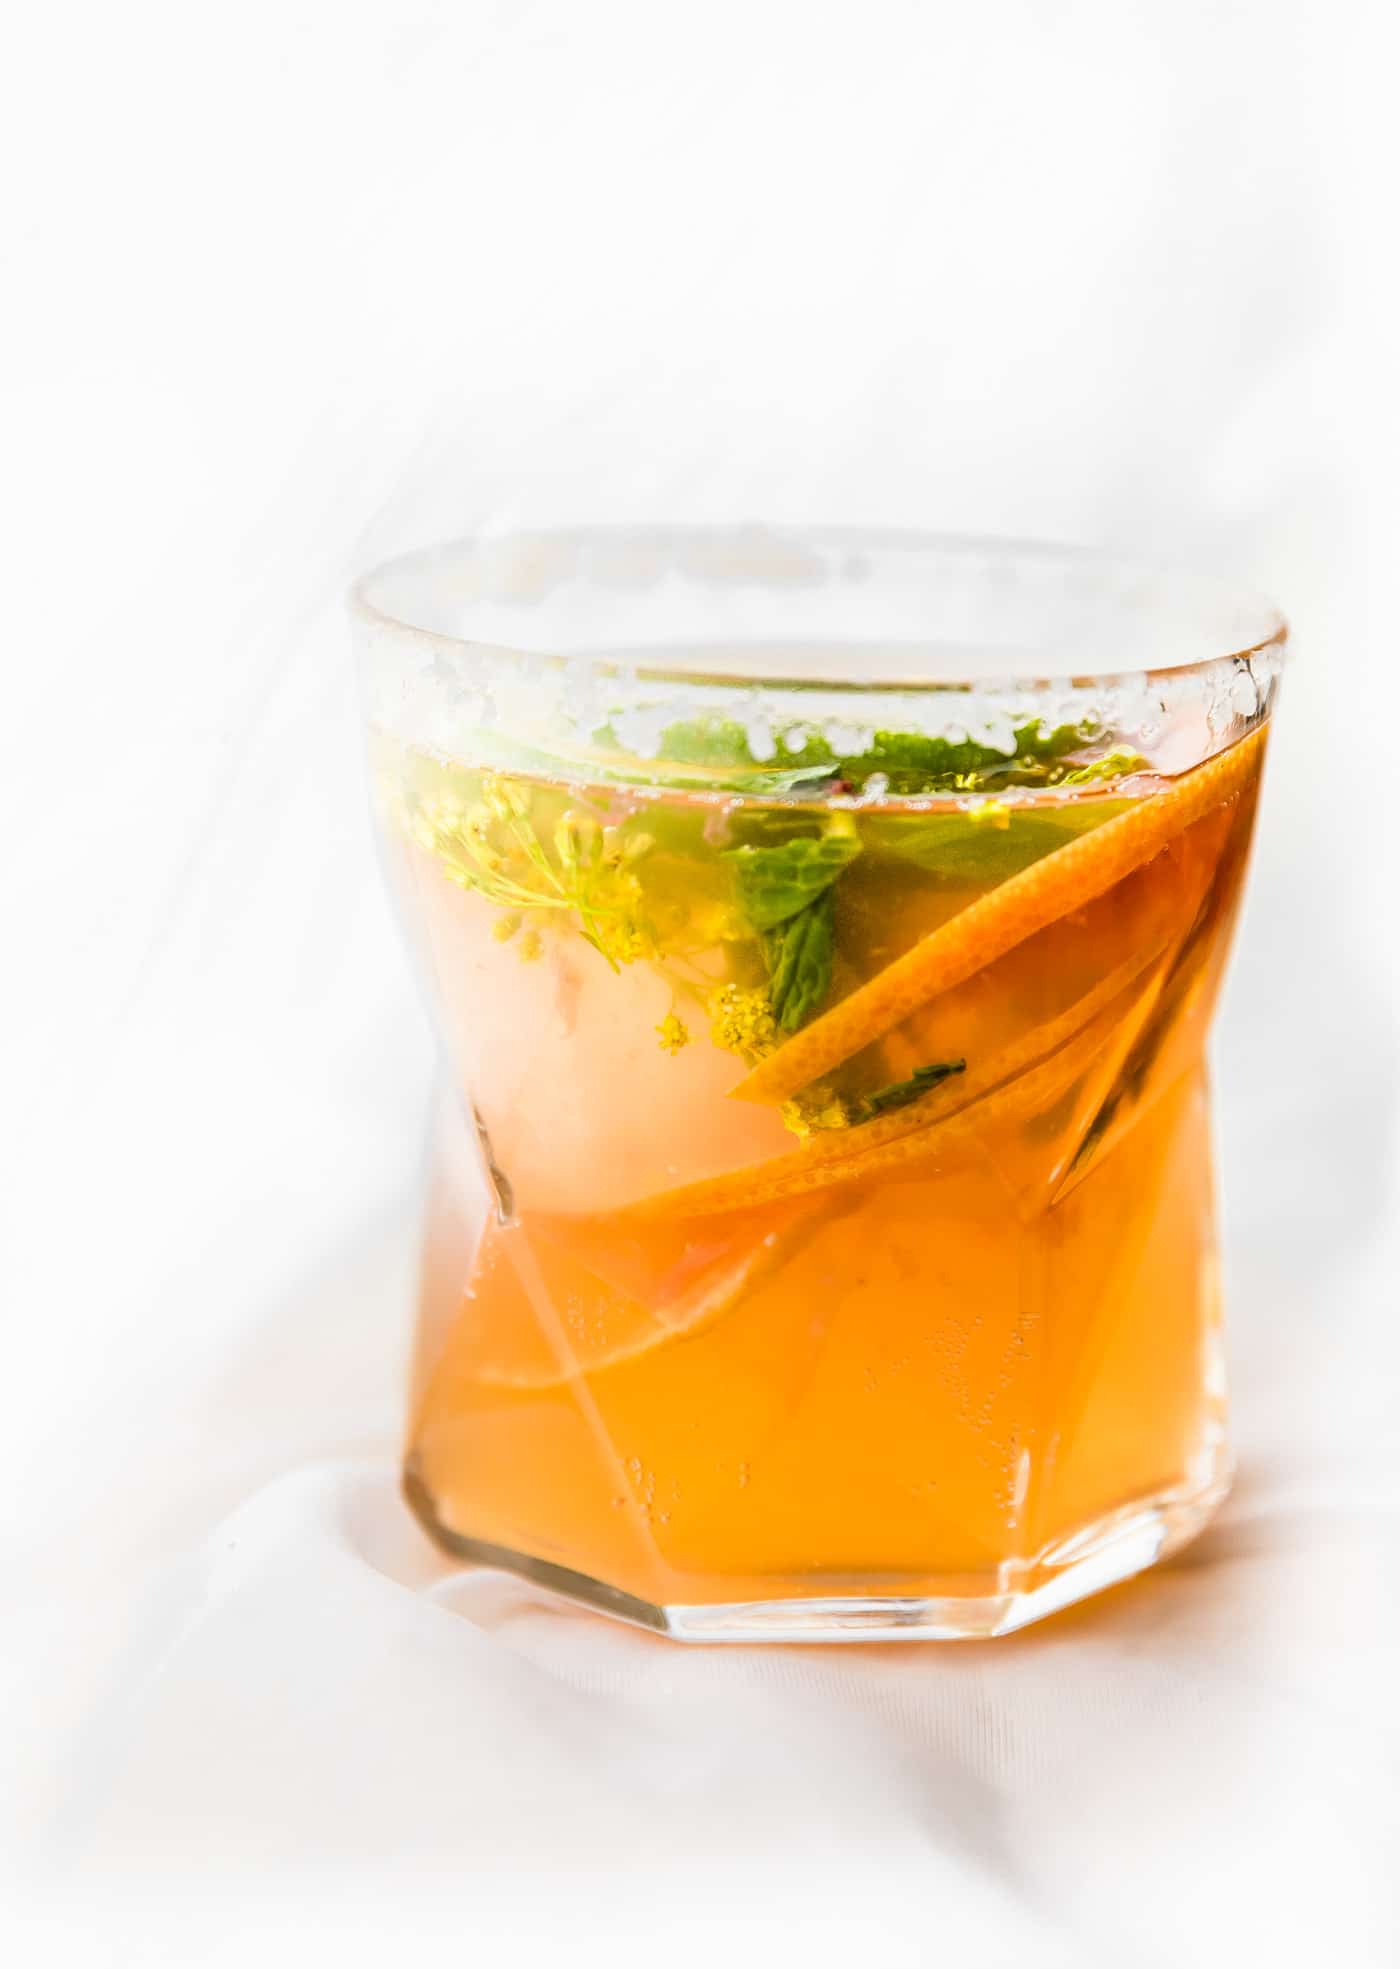 A glass filled with citrus kombucha mezcal cocktail topped with orange slices and herbs.